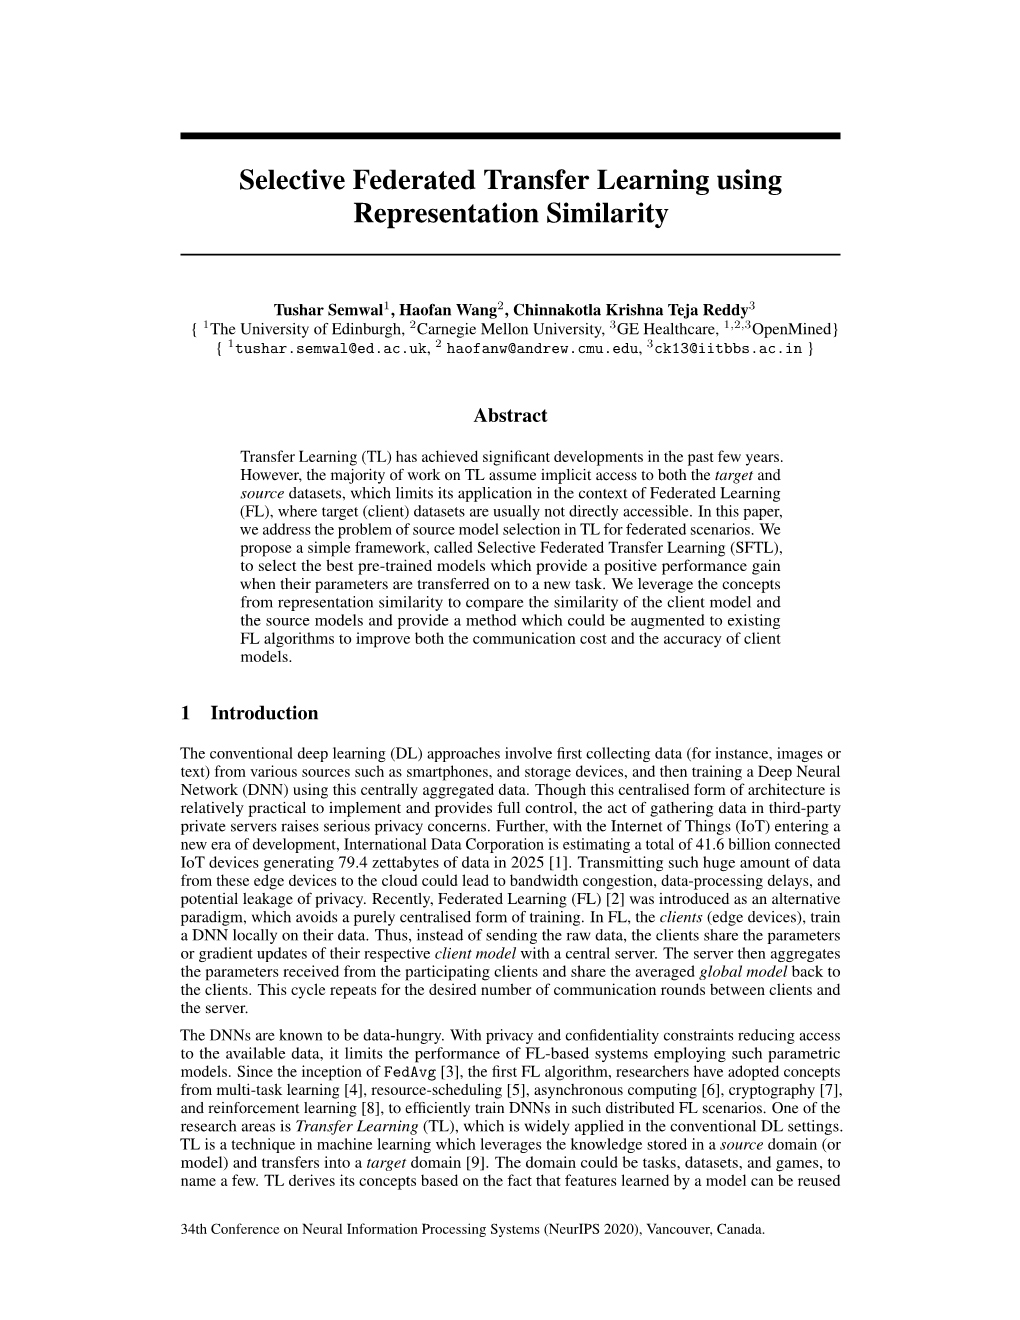 Selective Federated Transfer Learning Using Representation Similarity